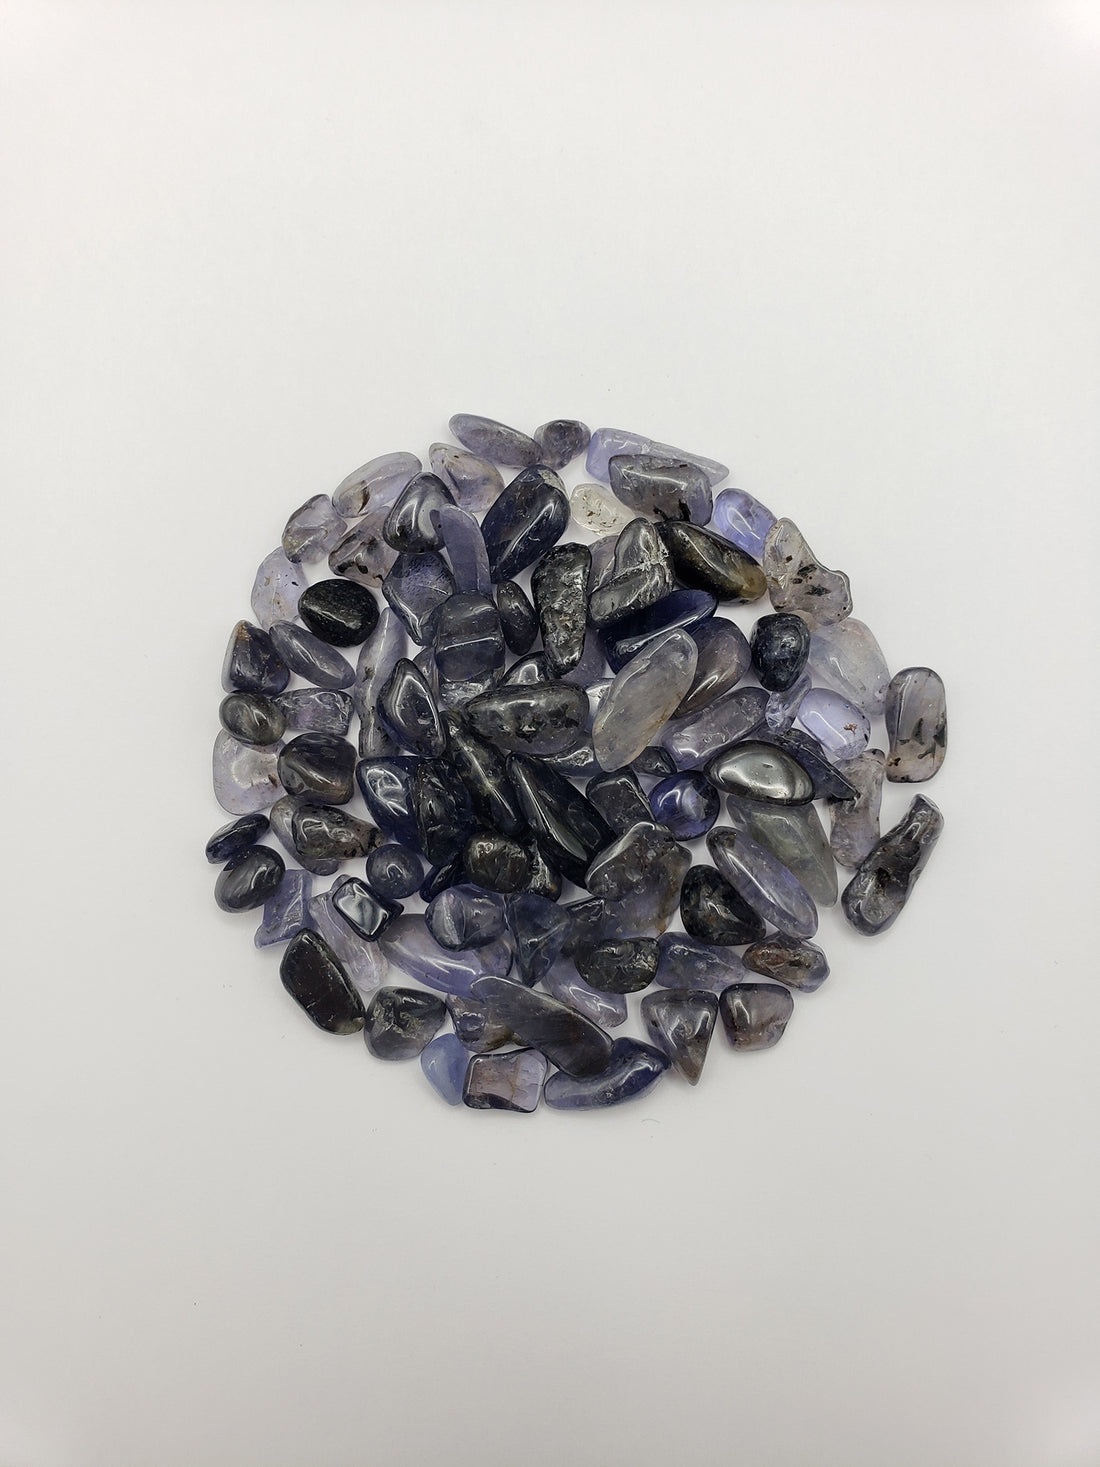 One ounce of iolite crystal chips on white background